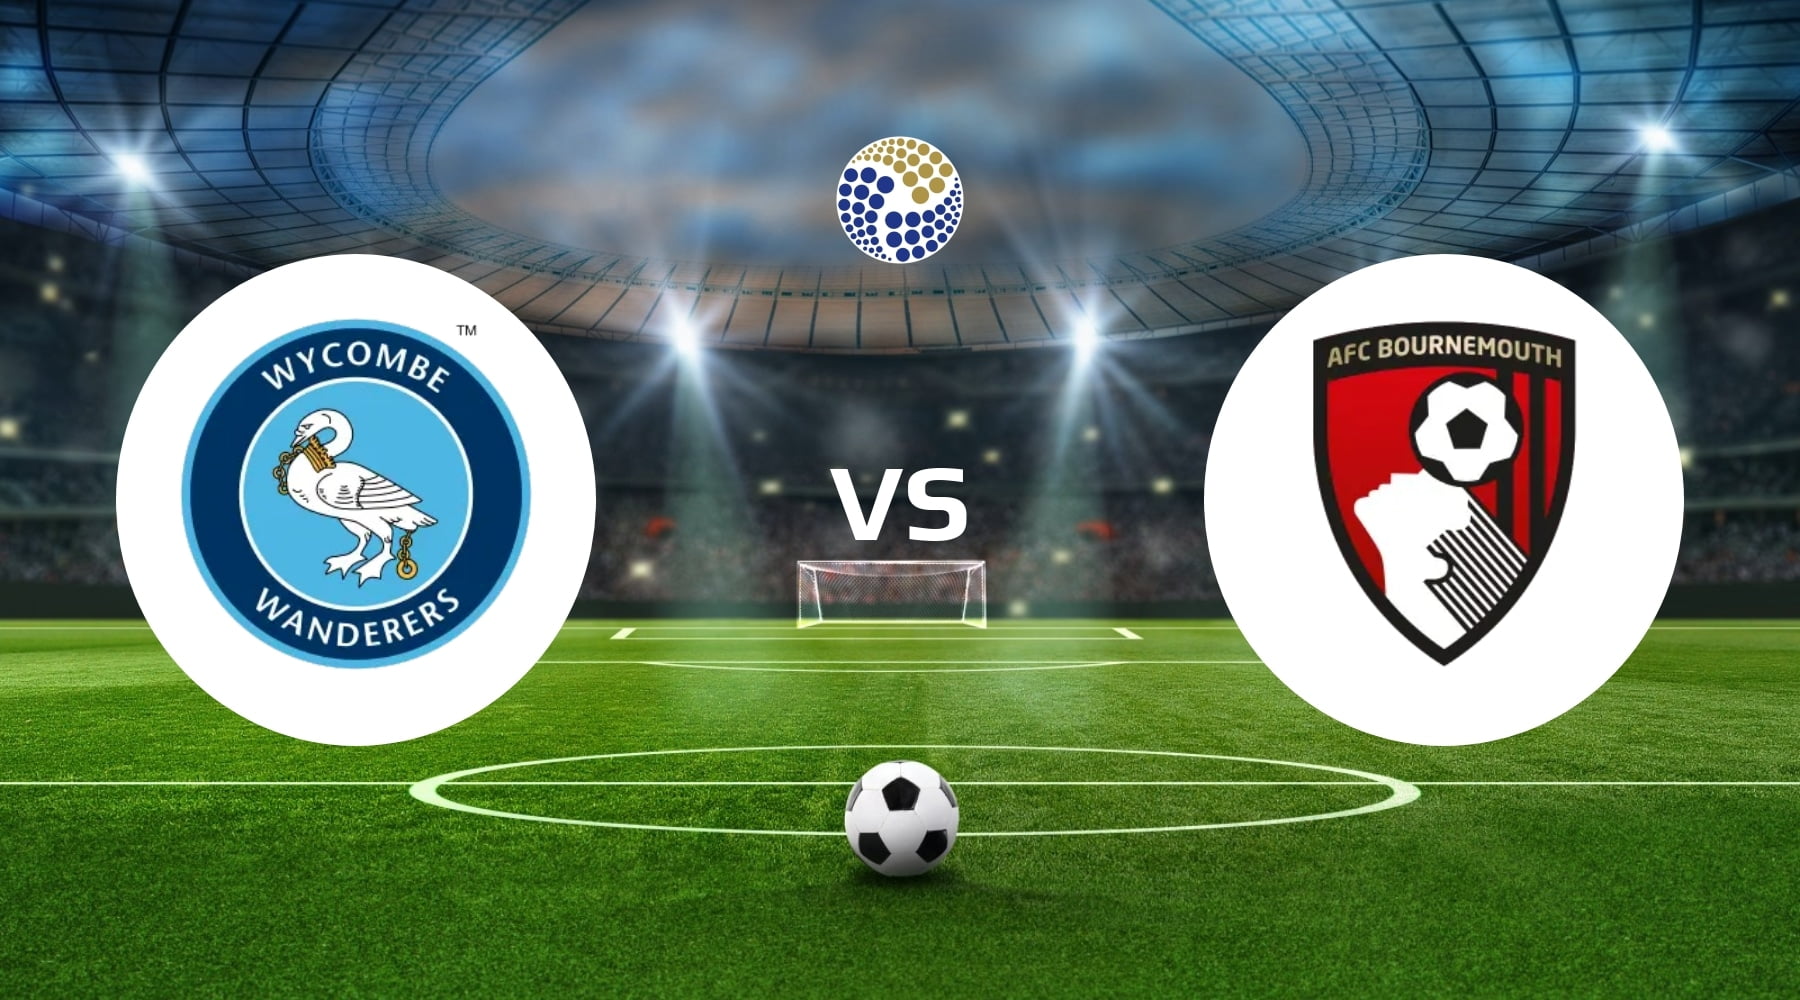 Wycombe Wanderers vs AFC Bournemouth Prediction & Betting Tips